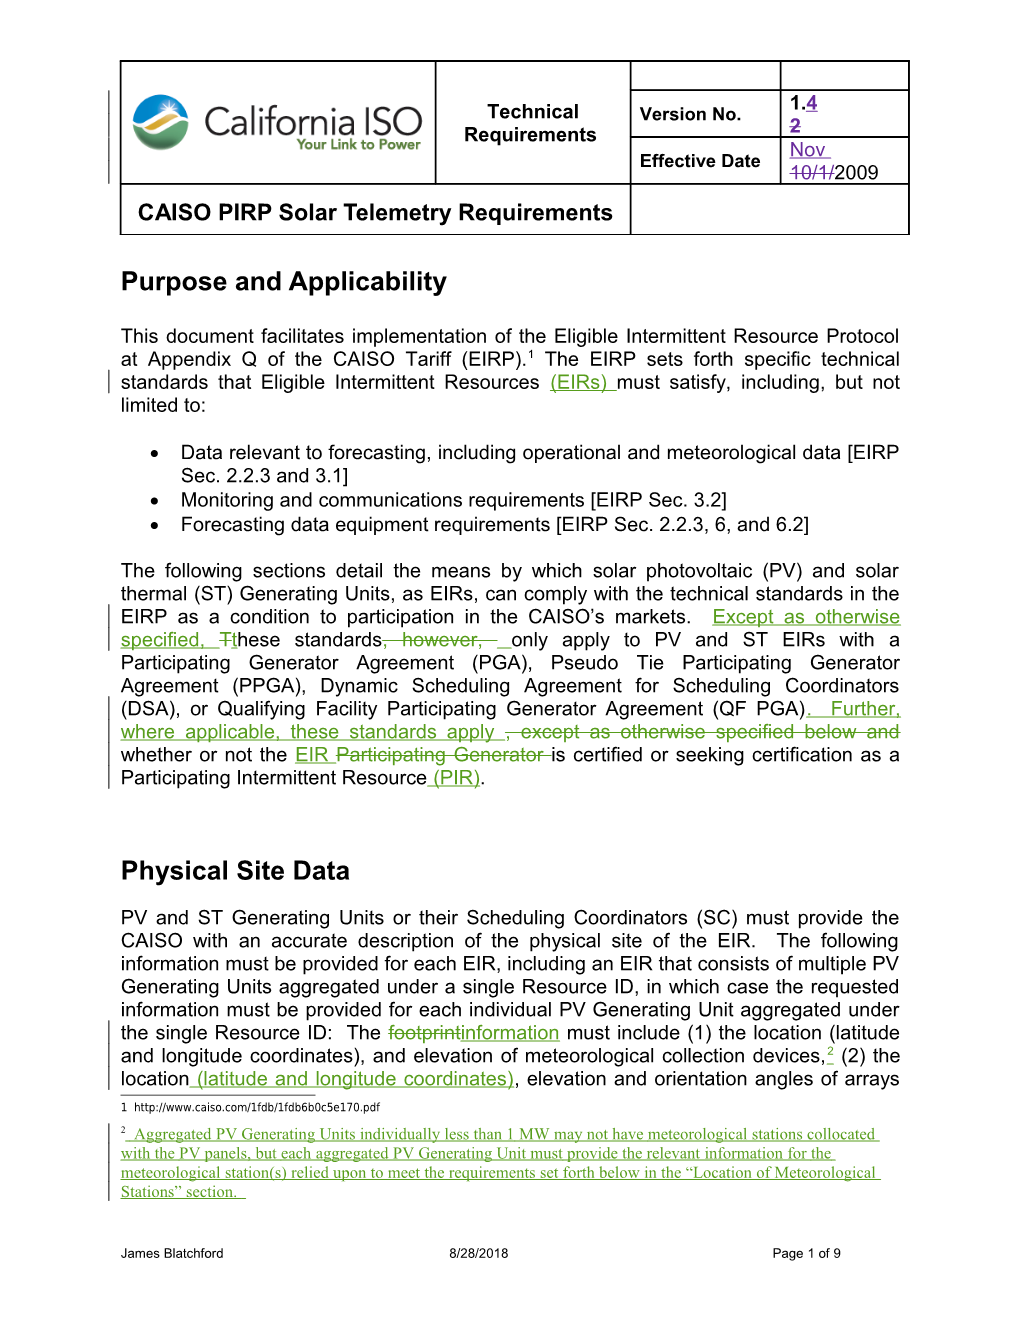 ISO PIRP Solar Technical Requirements - Revision 4